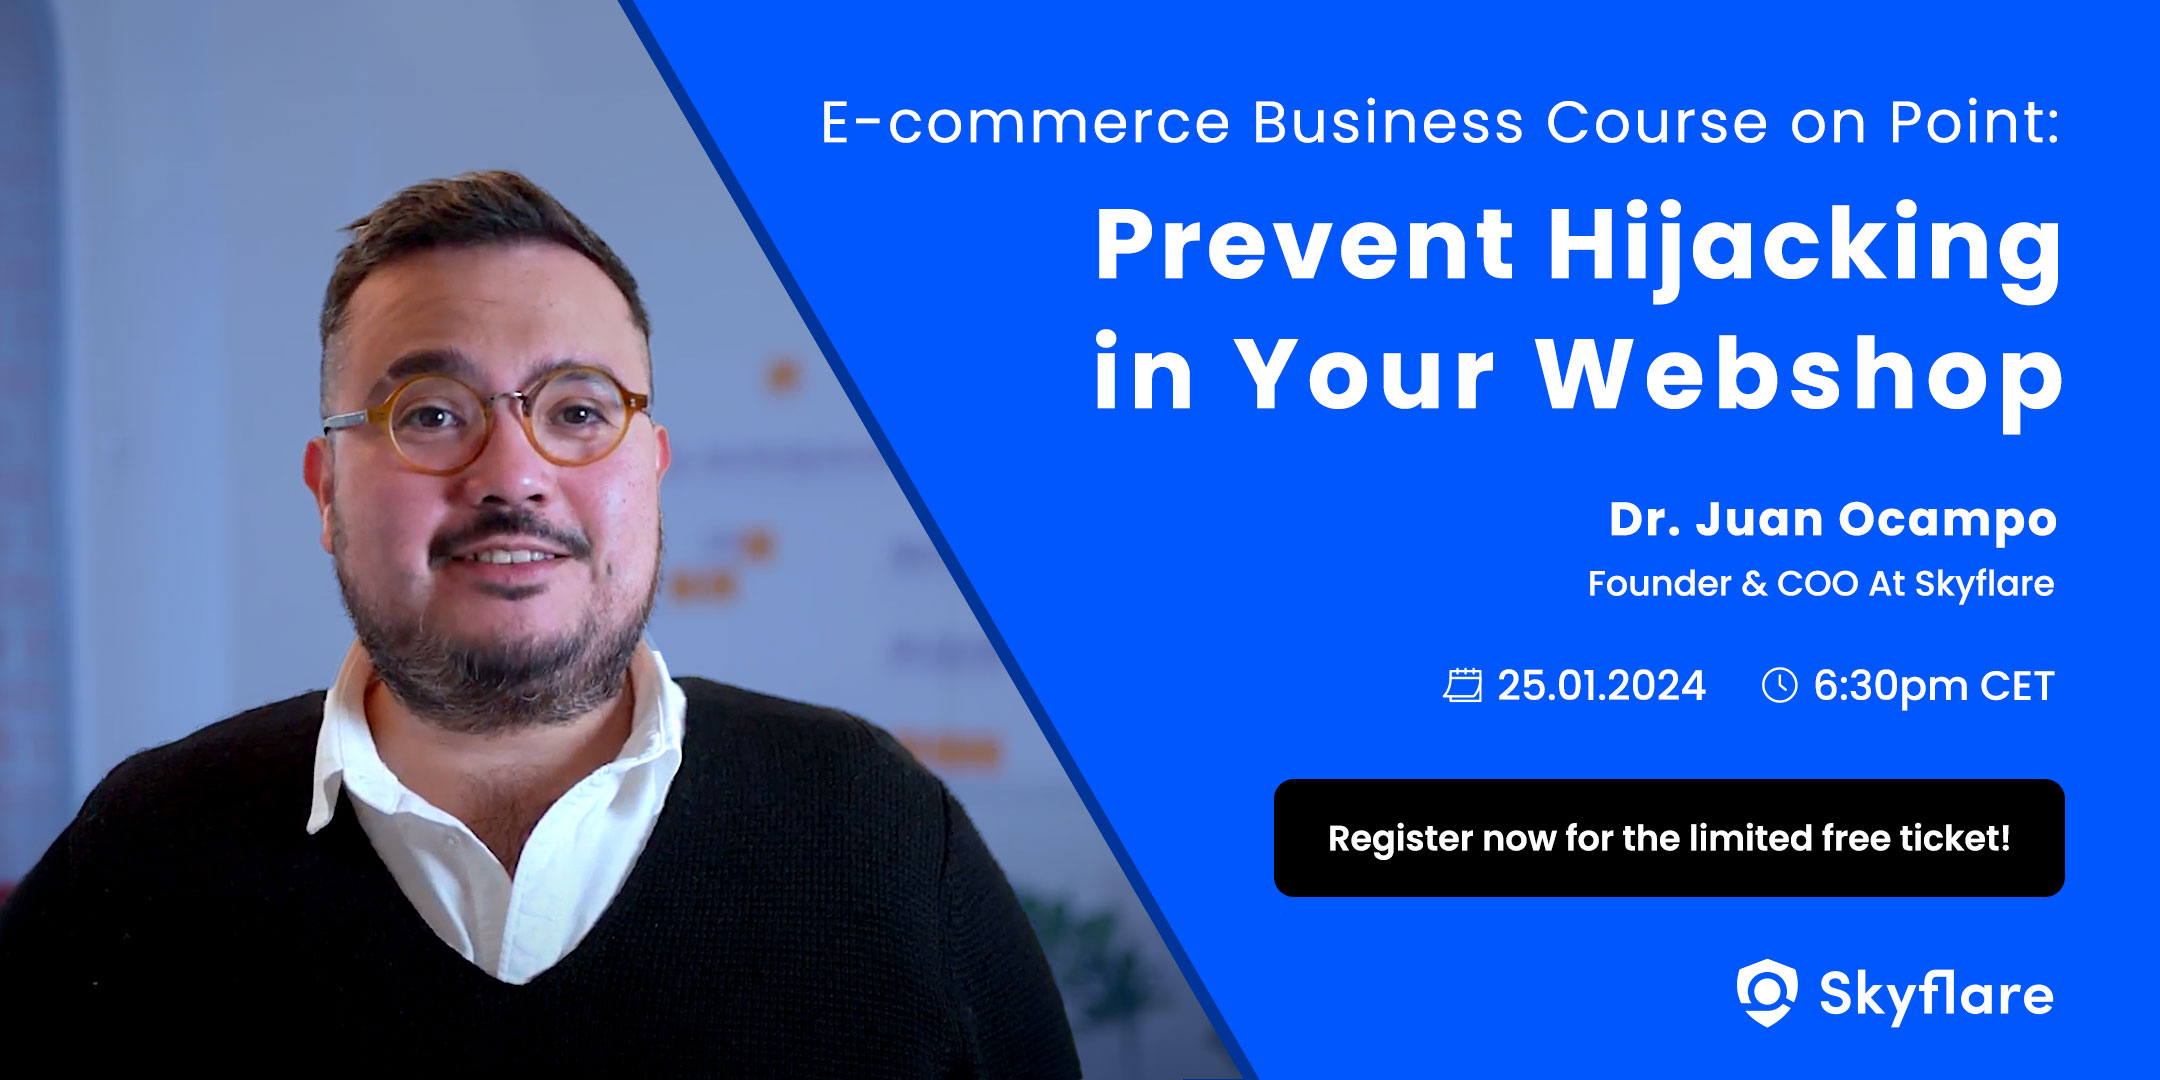 E-commerce Business Course on Point: Prevent Hijacking in Your Webshop